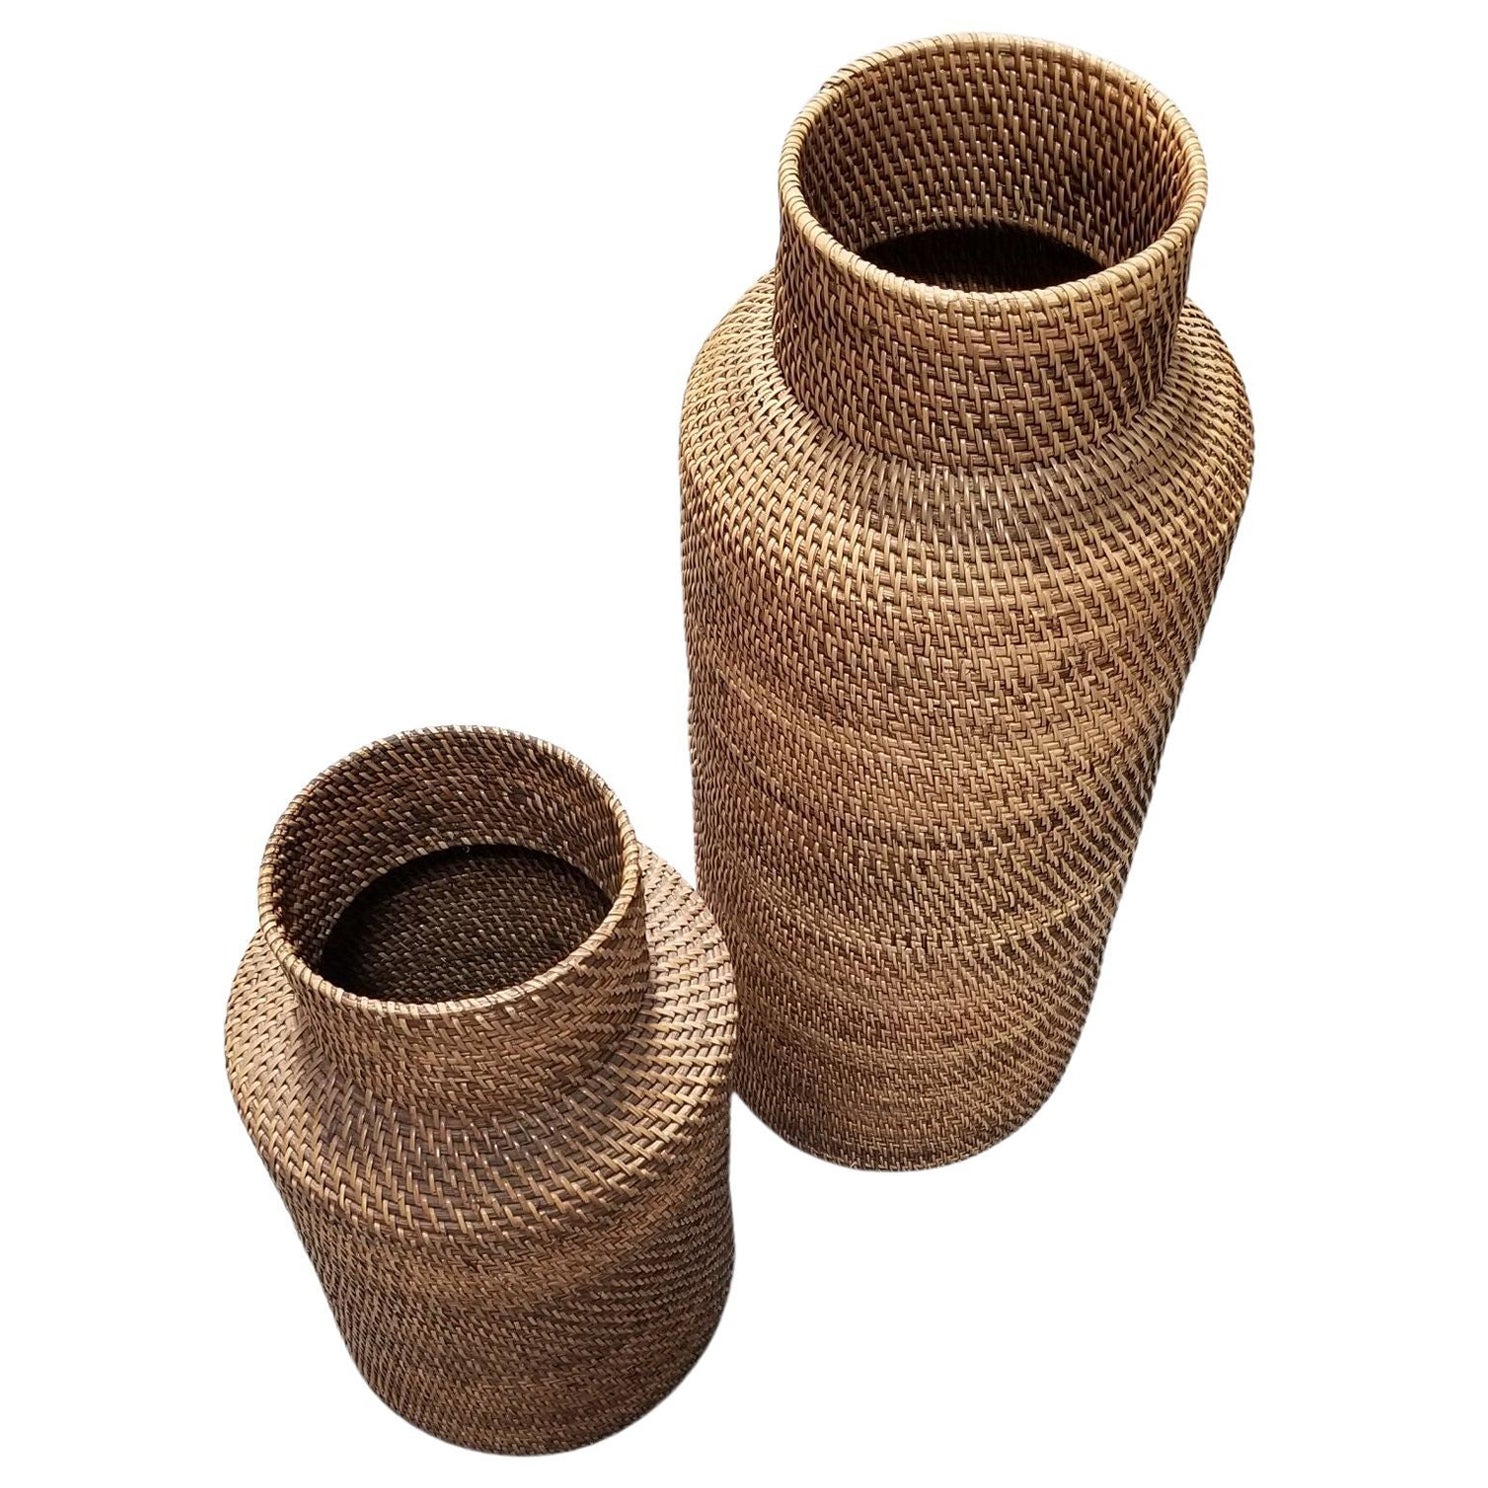 Restored Reed Rattan Wicker Decorative Vases Gabriella Crespi Styled - Pair of 2 For Sale